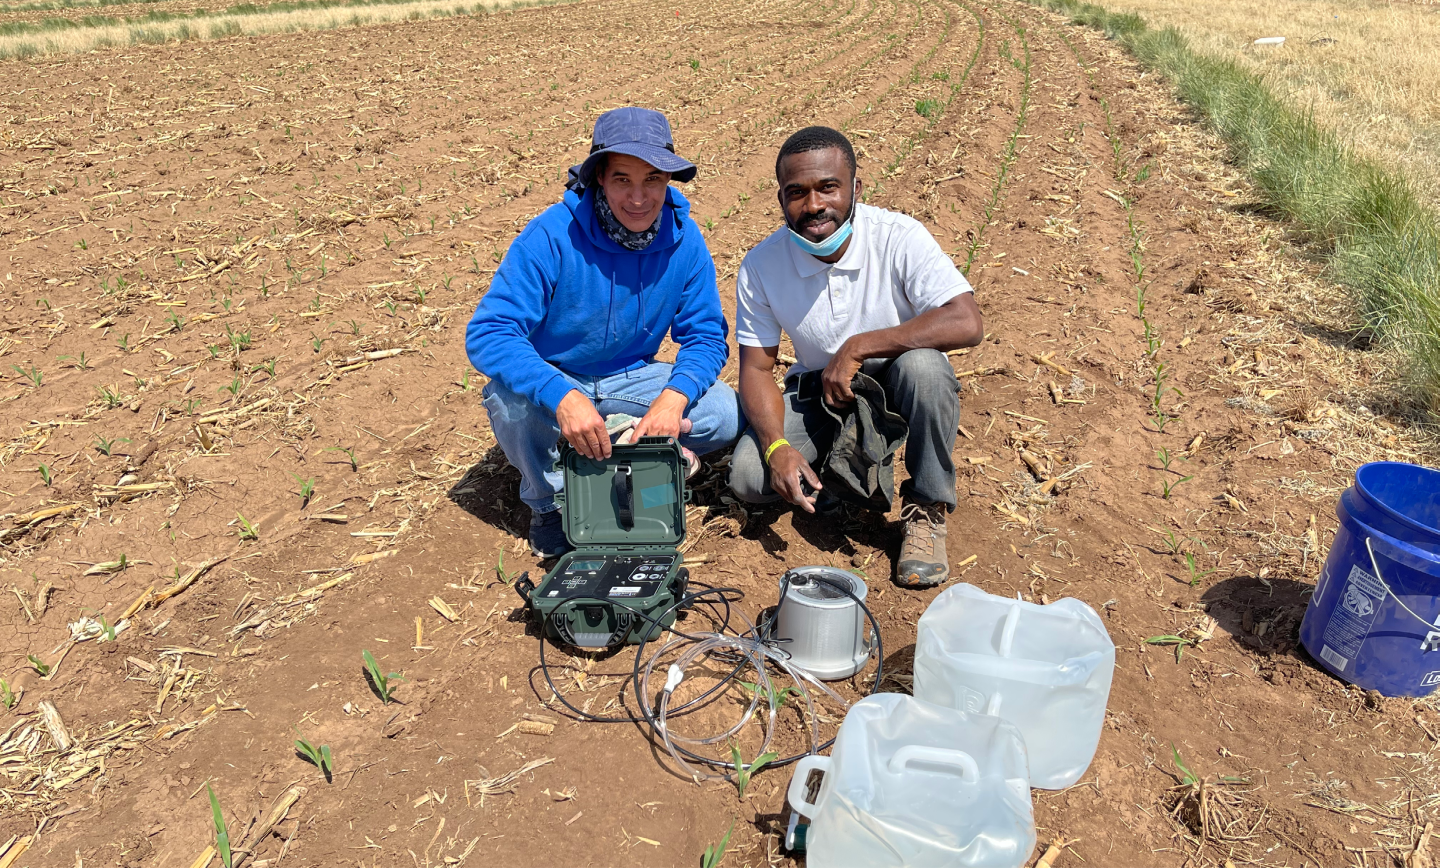 Two scientists kneel in a field with equipment.